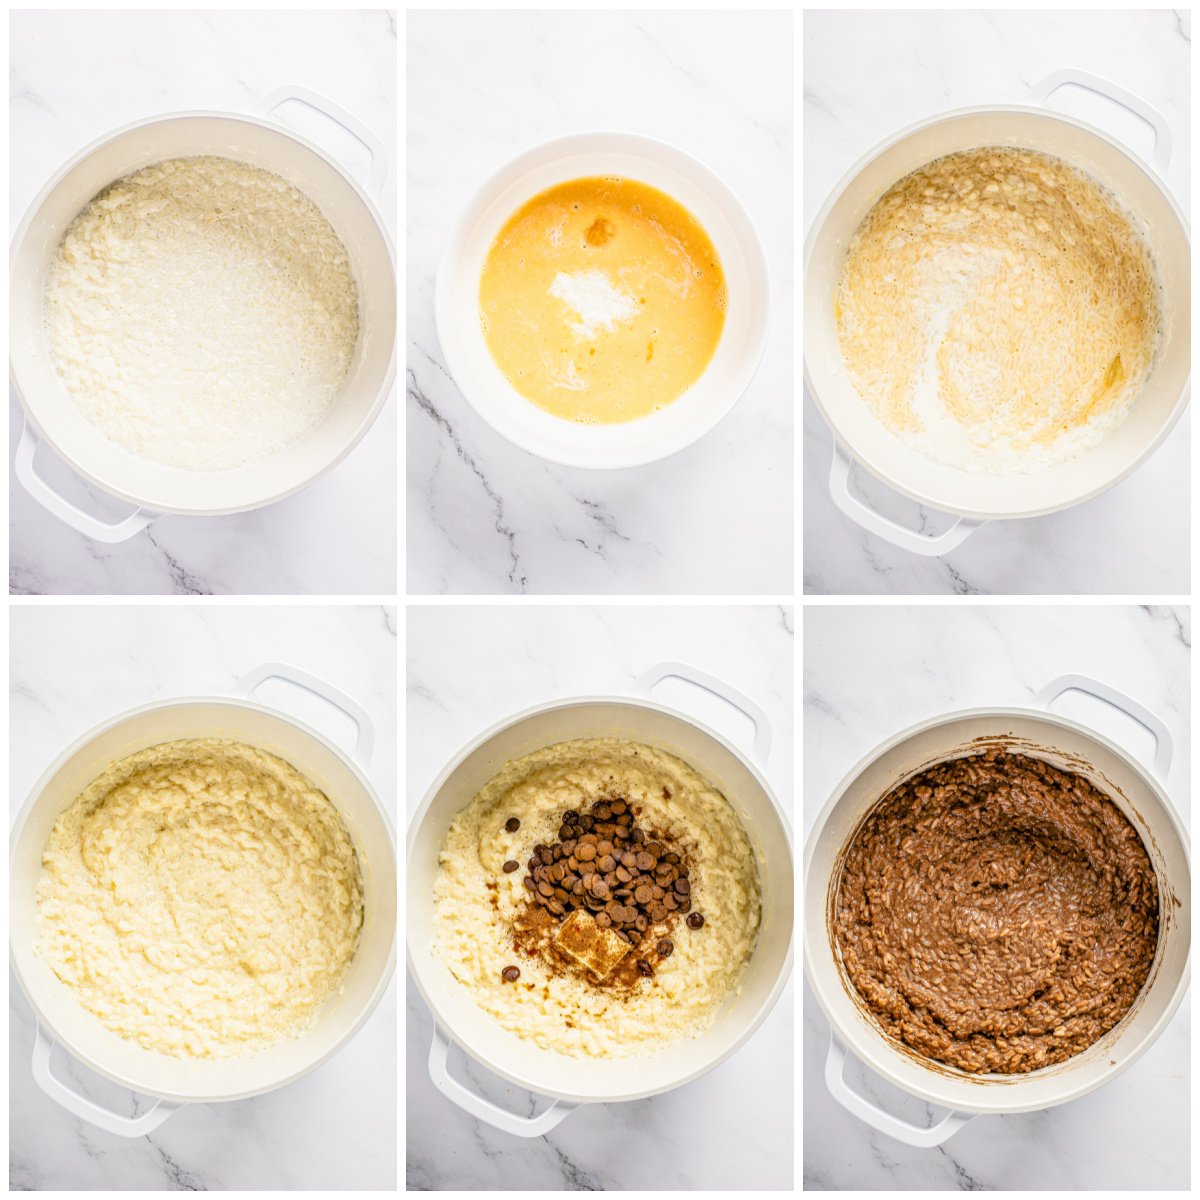 Step by step photos on how to make Chocolate Rice Pudding